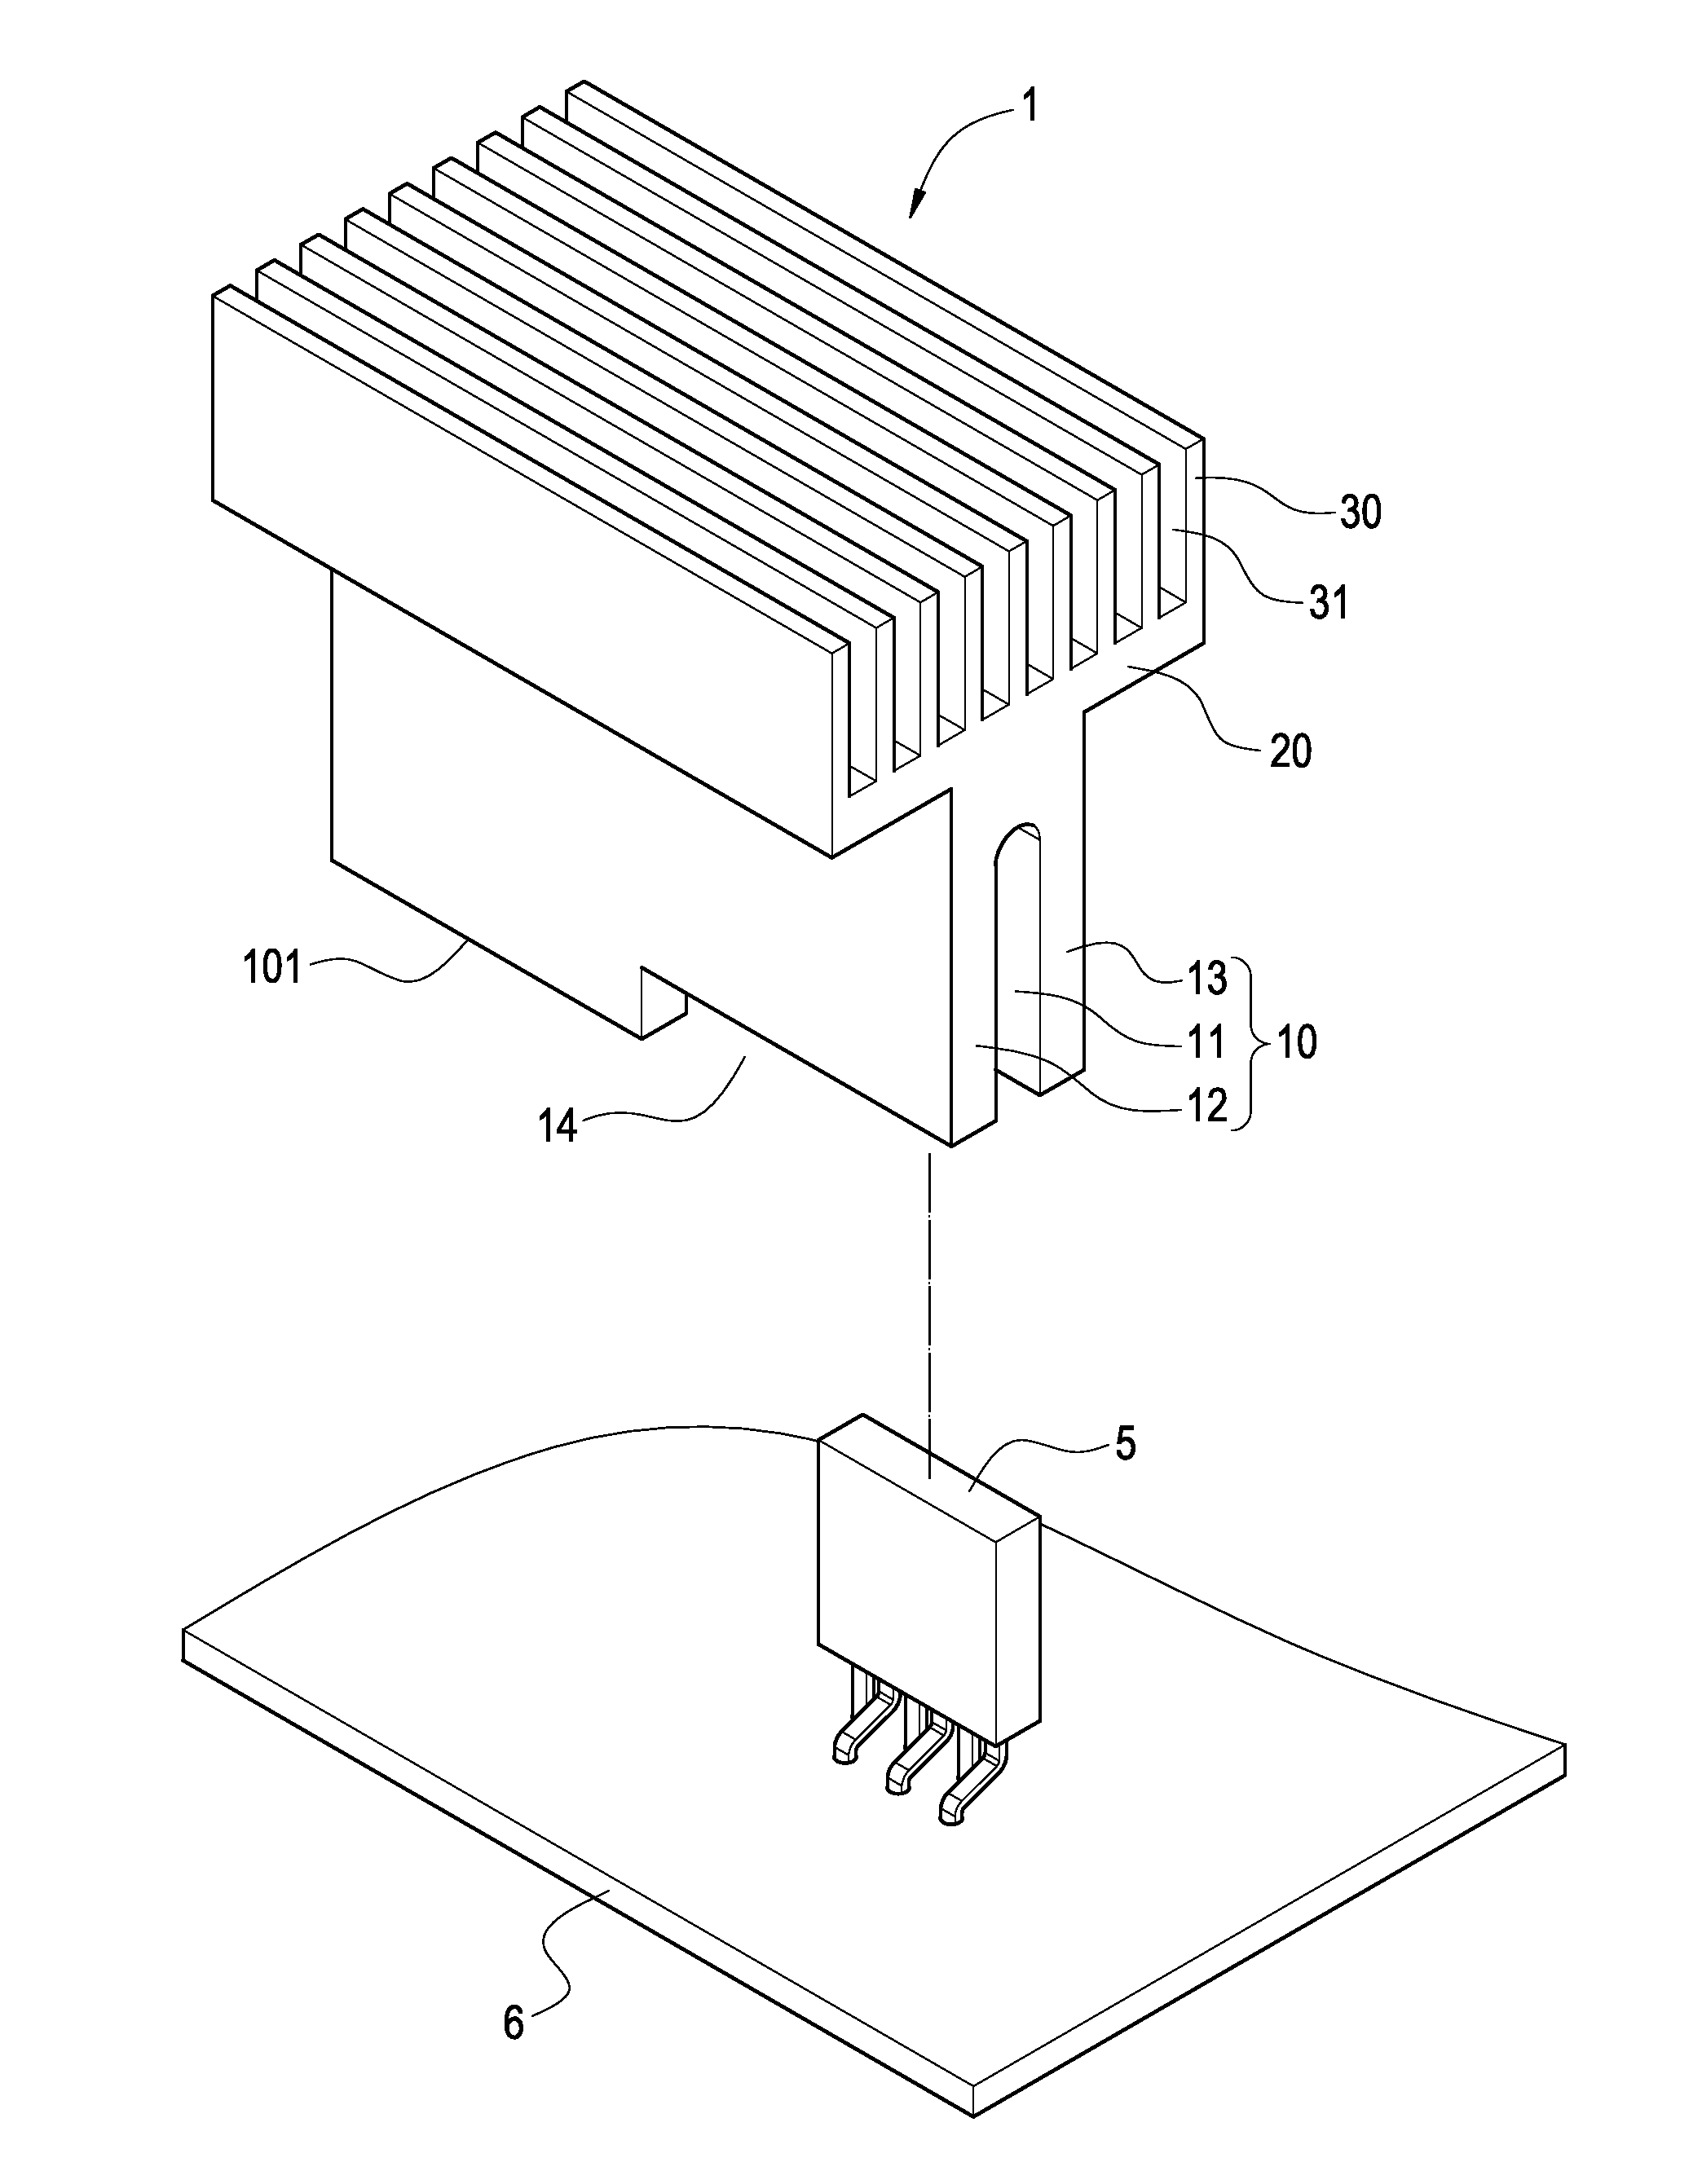 Bidirectional heat sink for package element and method for assembling the same